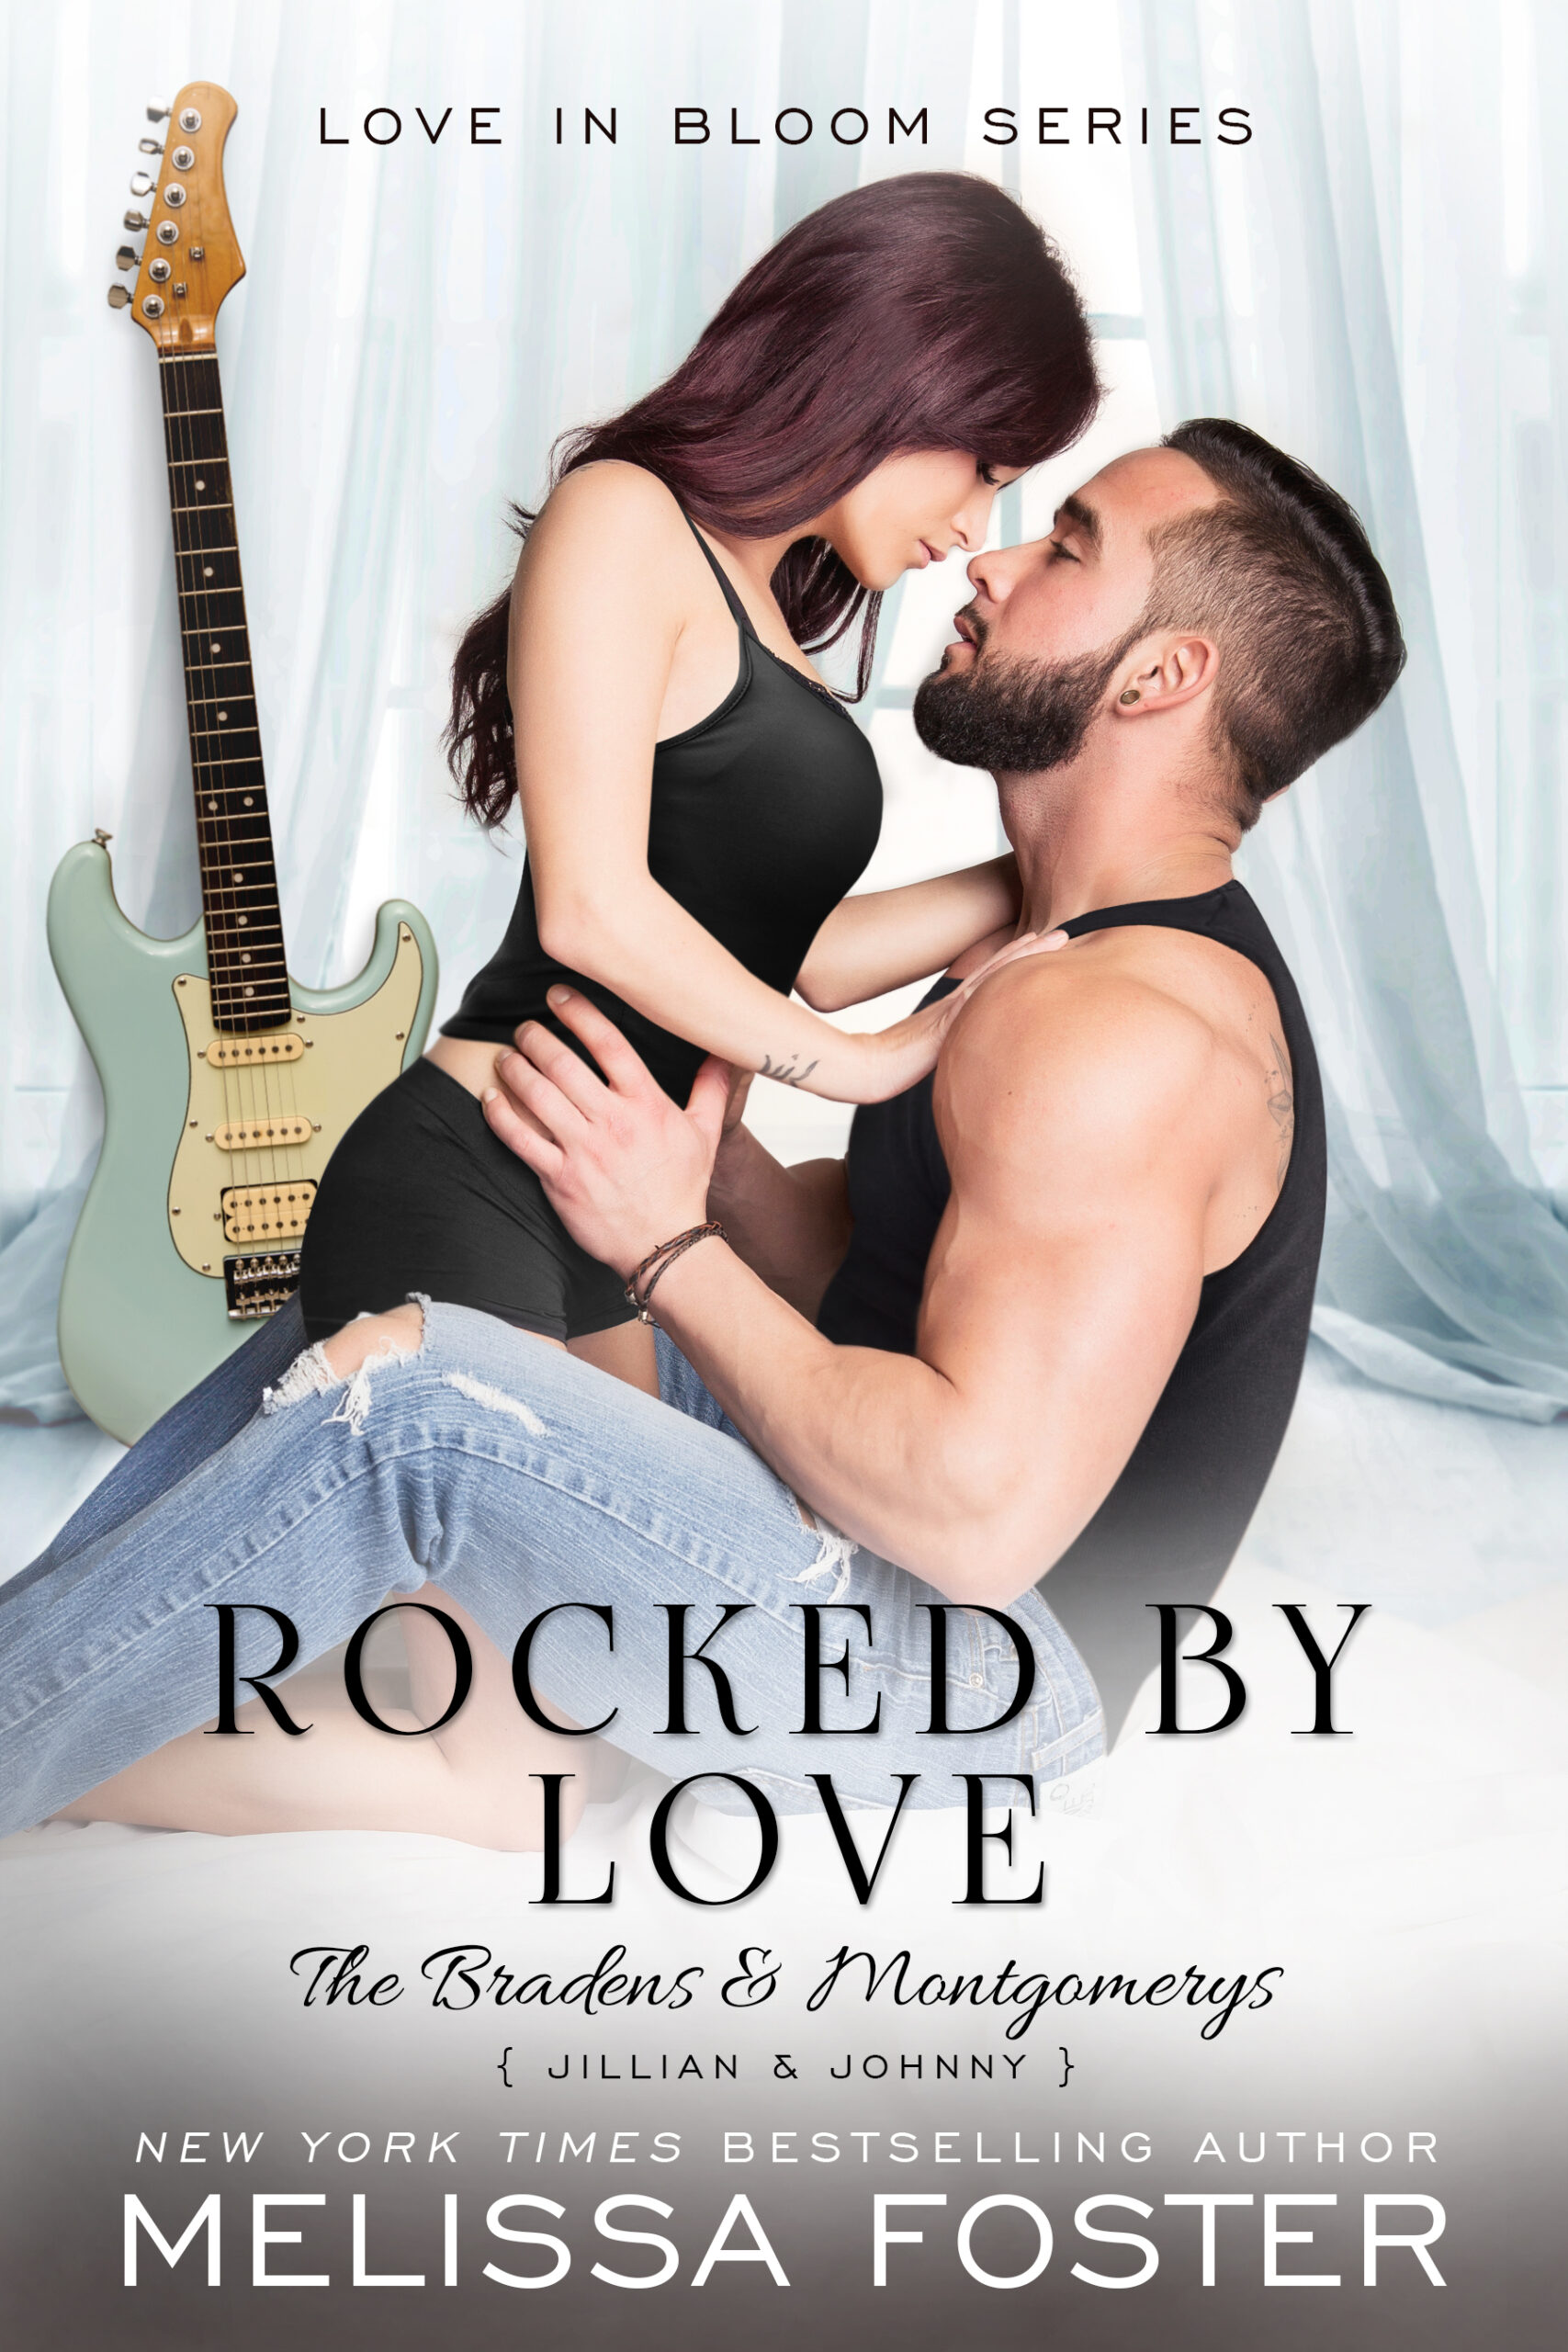 Rocked by Love Paperback by Melissa Foster